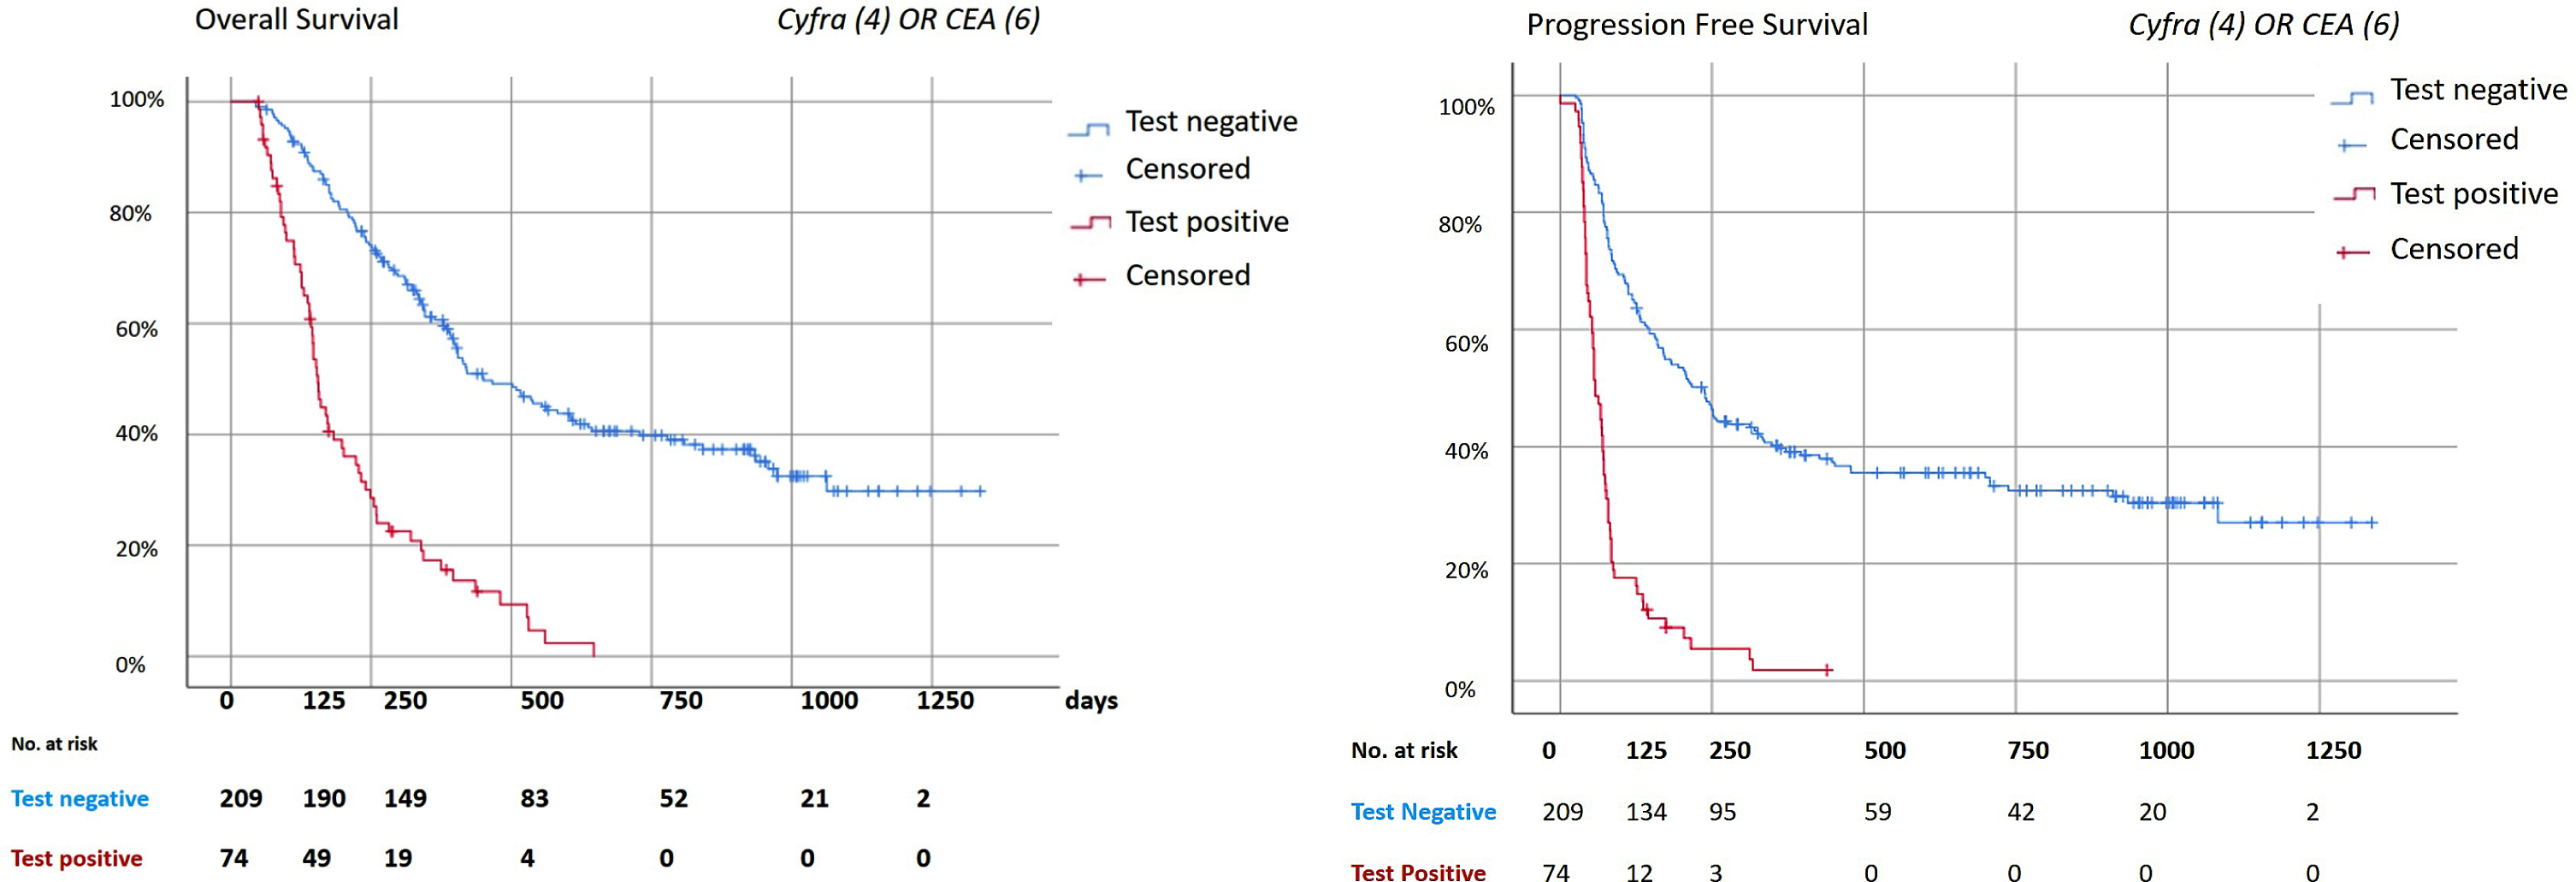 Survival analysis. Kaplan Meier analysis for the combination of Cyfra (4μg/L) and CEA (6μg/L). The combination of markers were considered positive if at least one of the tumor markers had a positive test result. All the analysis were done with the patients who had a test at week 6, as described in table S3. The median follow-up time was 322 days (IQR: 157–606 days). Date of last follow-up was 28th of January, 2019. A: Overall Survival. Median overall survival: 363 days (95% CI 317–409 days). Median OS negative test: 450 days (95% CI 347–553 days); Positive test: 153 days (95% CI 139–167 days). Log Rank (Mantel-Cox): p <  0·001. B: Progression Free Survival. Median progression free survival (PFS) 130 days (95% CI 98–162days). Median PFS negative test: 237 days (95% CI 185–289). Median PFS positive test: 58 days (95% CI 46–70 days). Log rank (Mantel-Cox) p <  0·001.